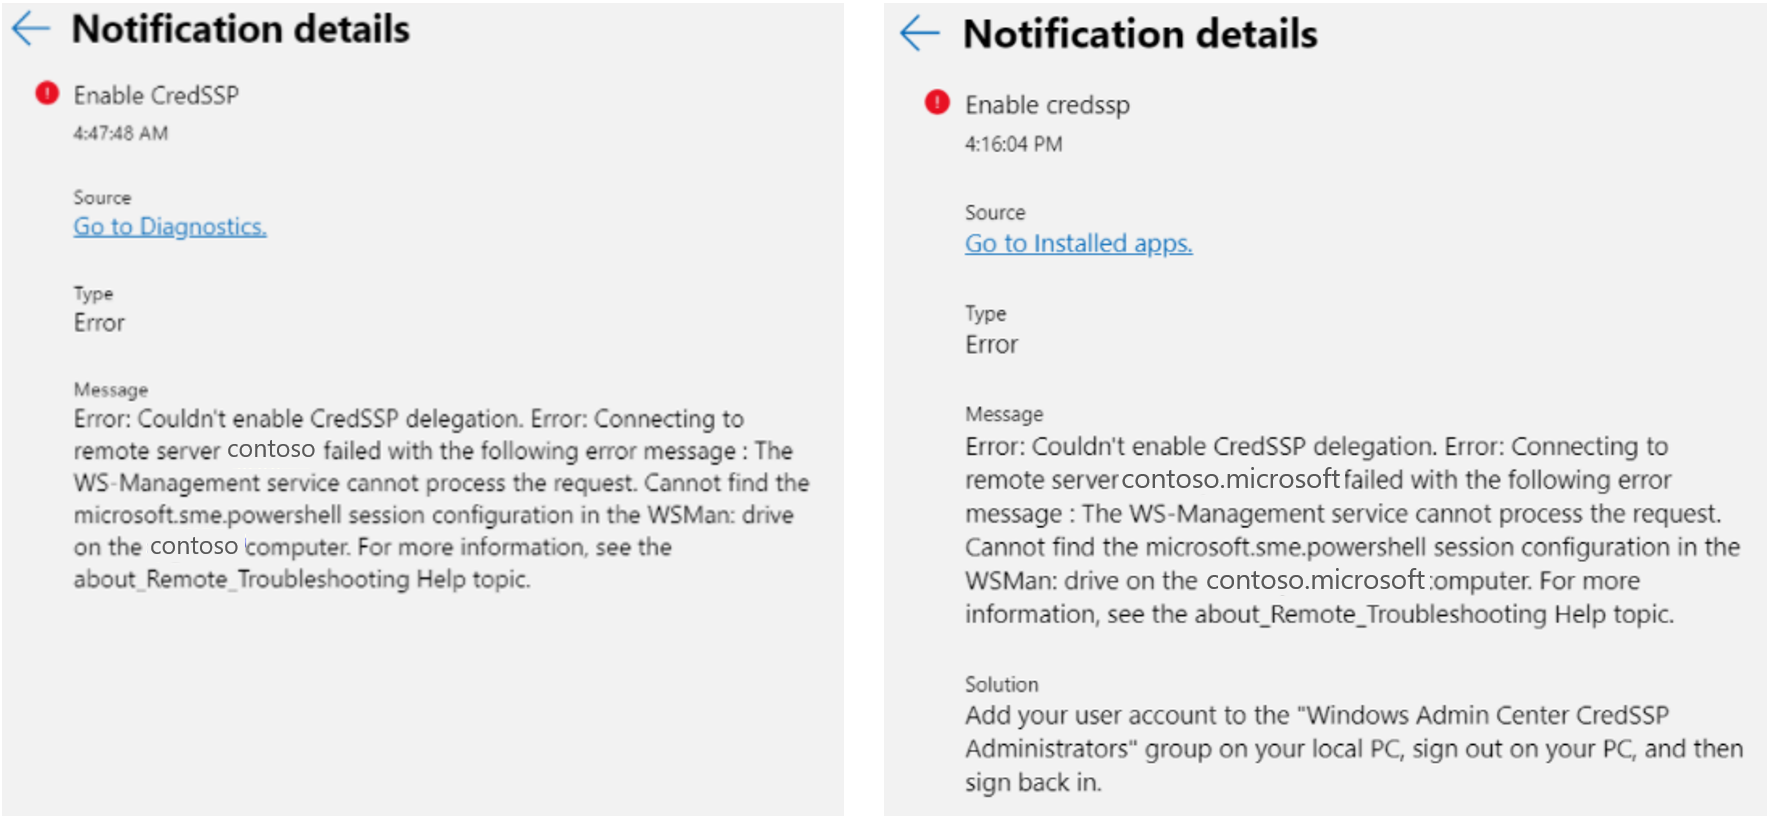 A side by side comparison of the error notification for Cred S S P.